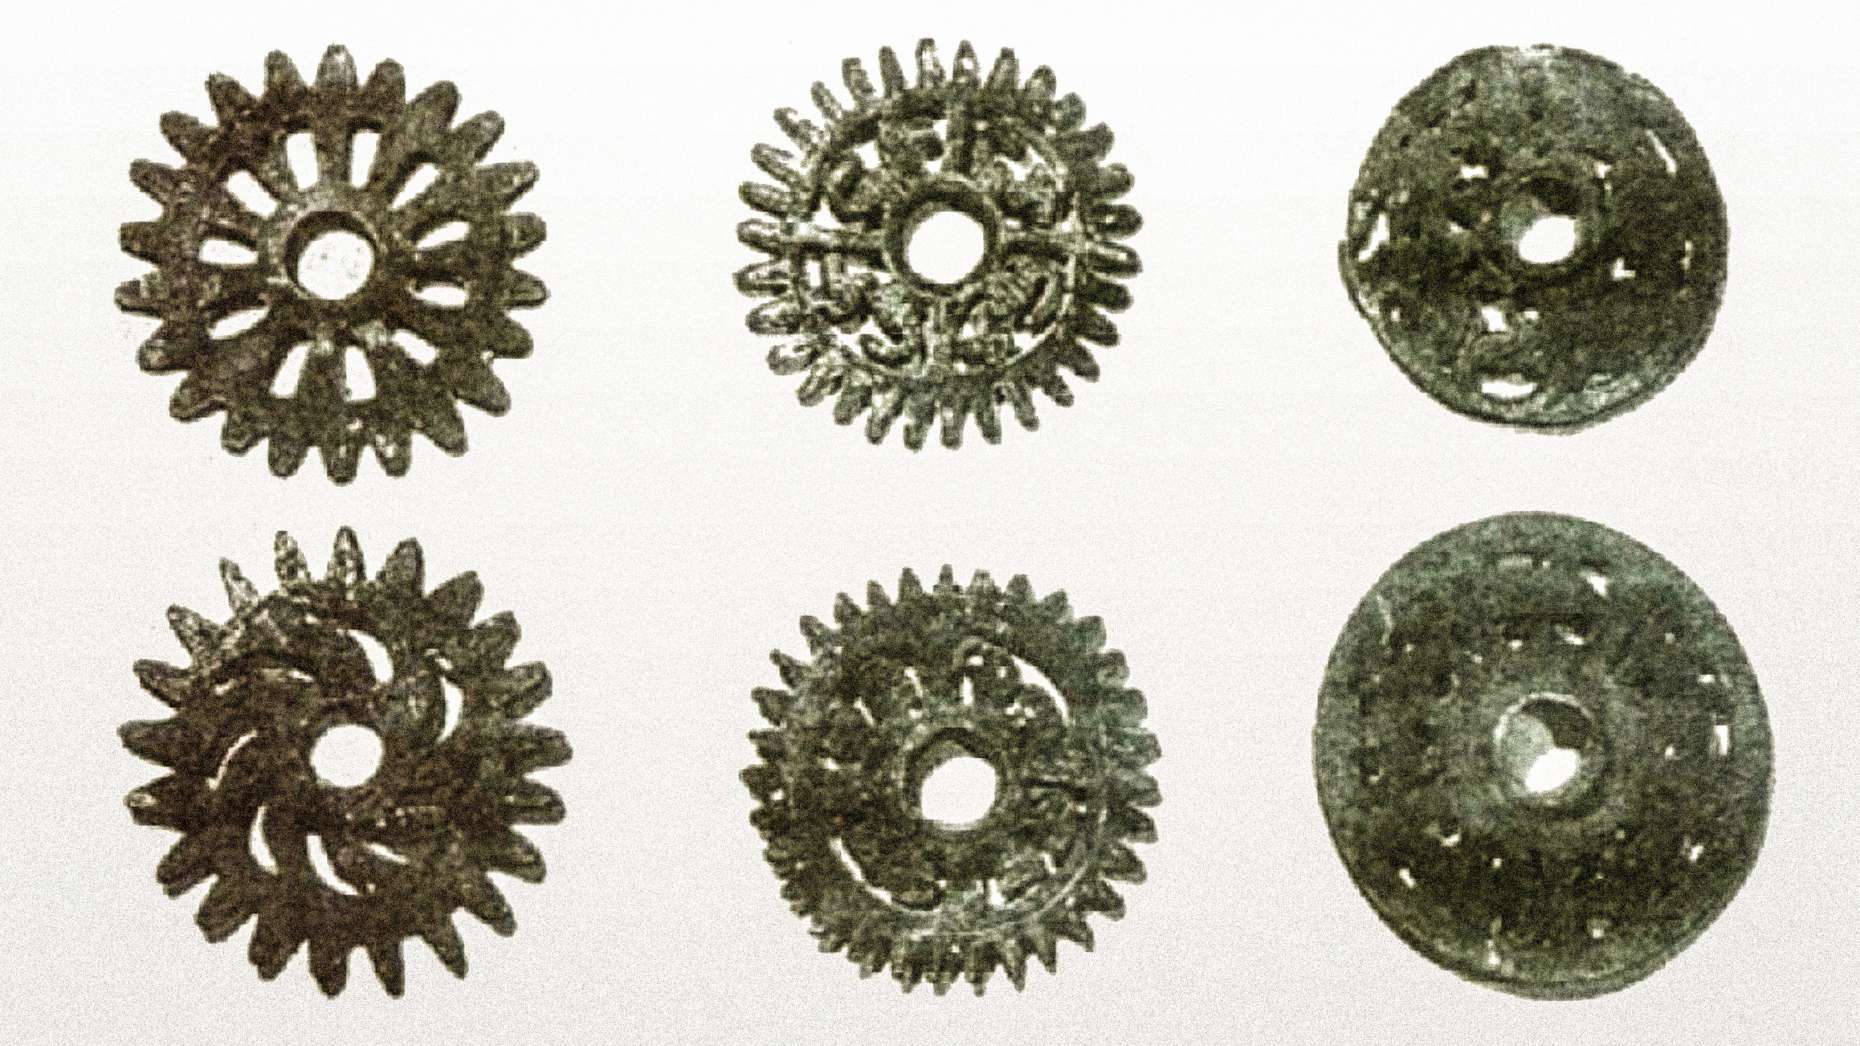 Controversial prehistoric bronze gears of Peru: The legendary 'Key' to the lands of the Gods? 2